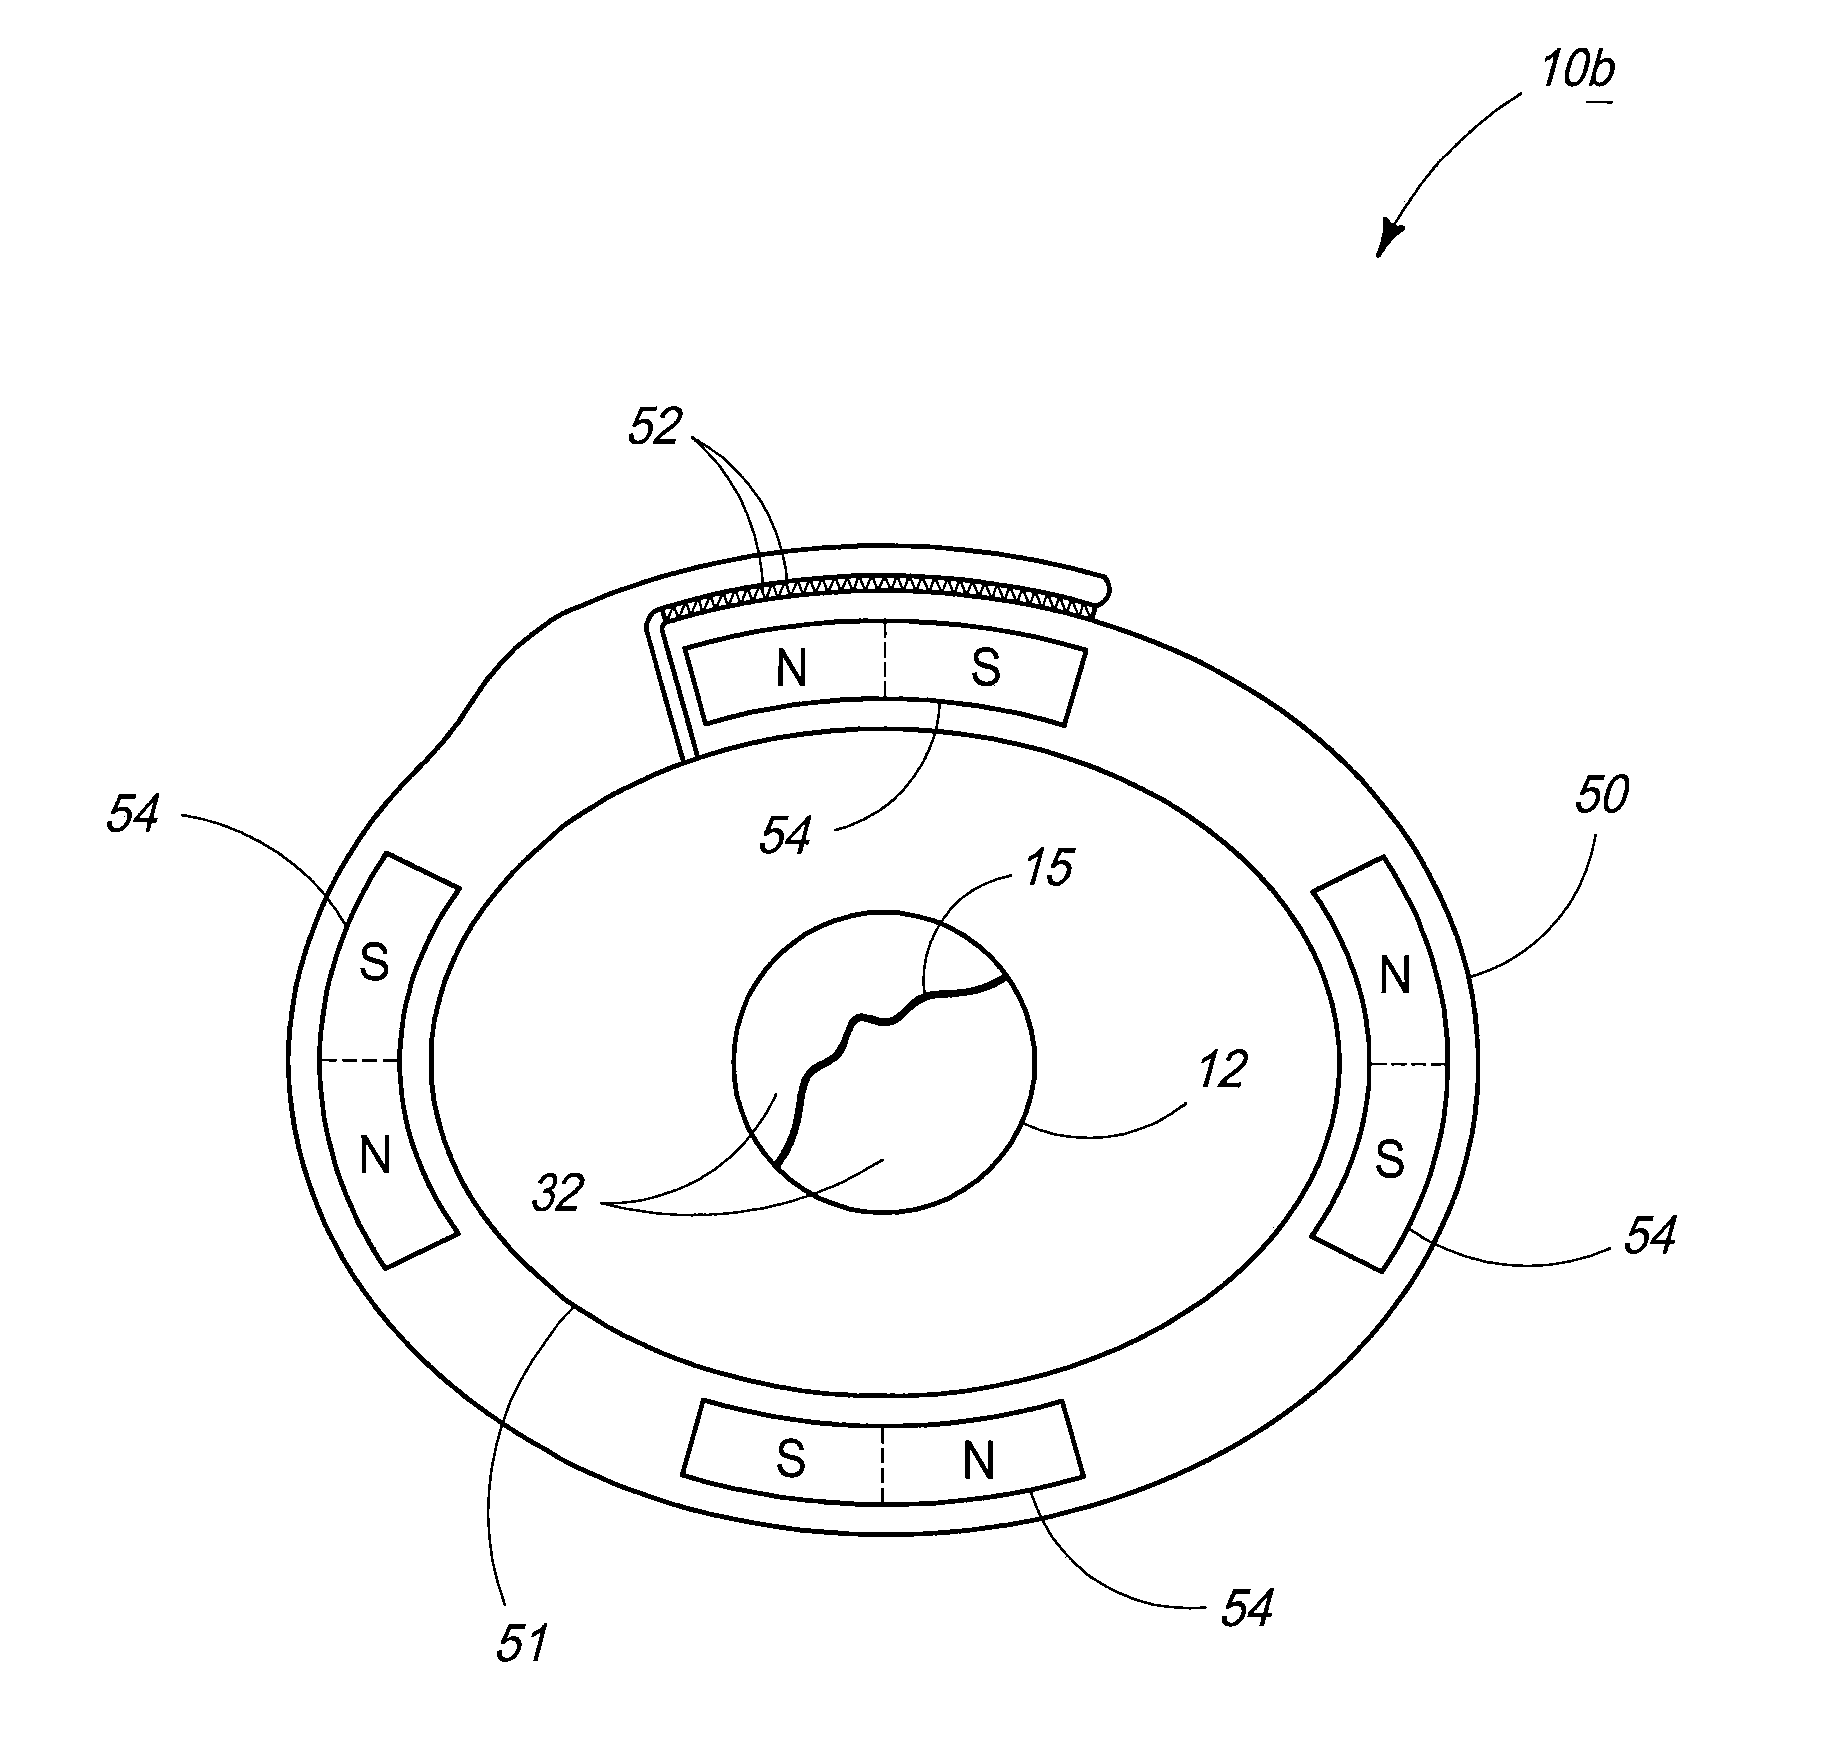 Fractured Bone Treatment Methods And Fractured Bone Treatment Assemblies